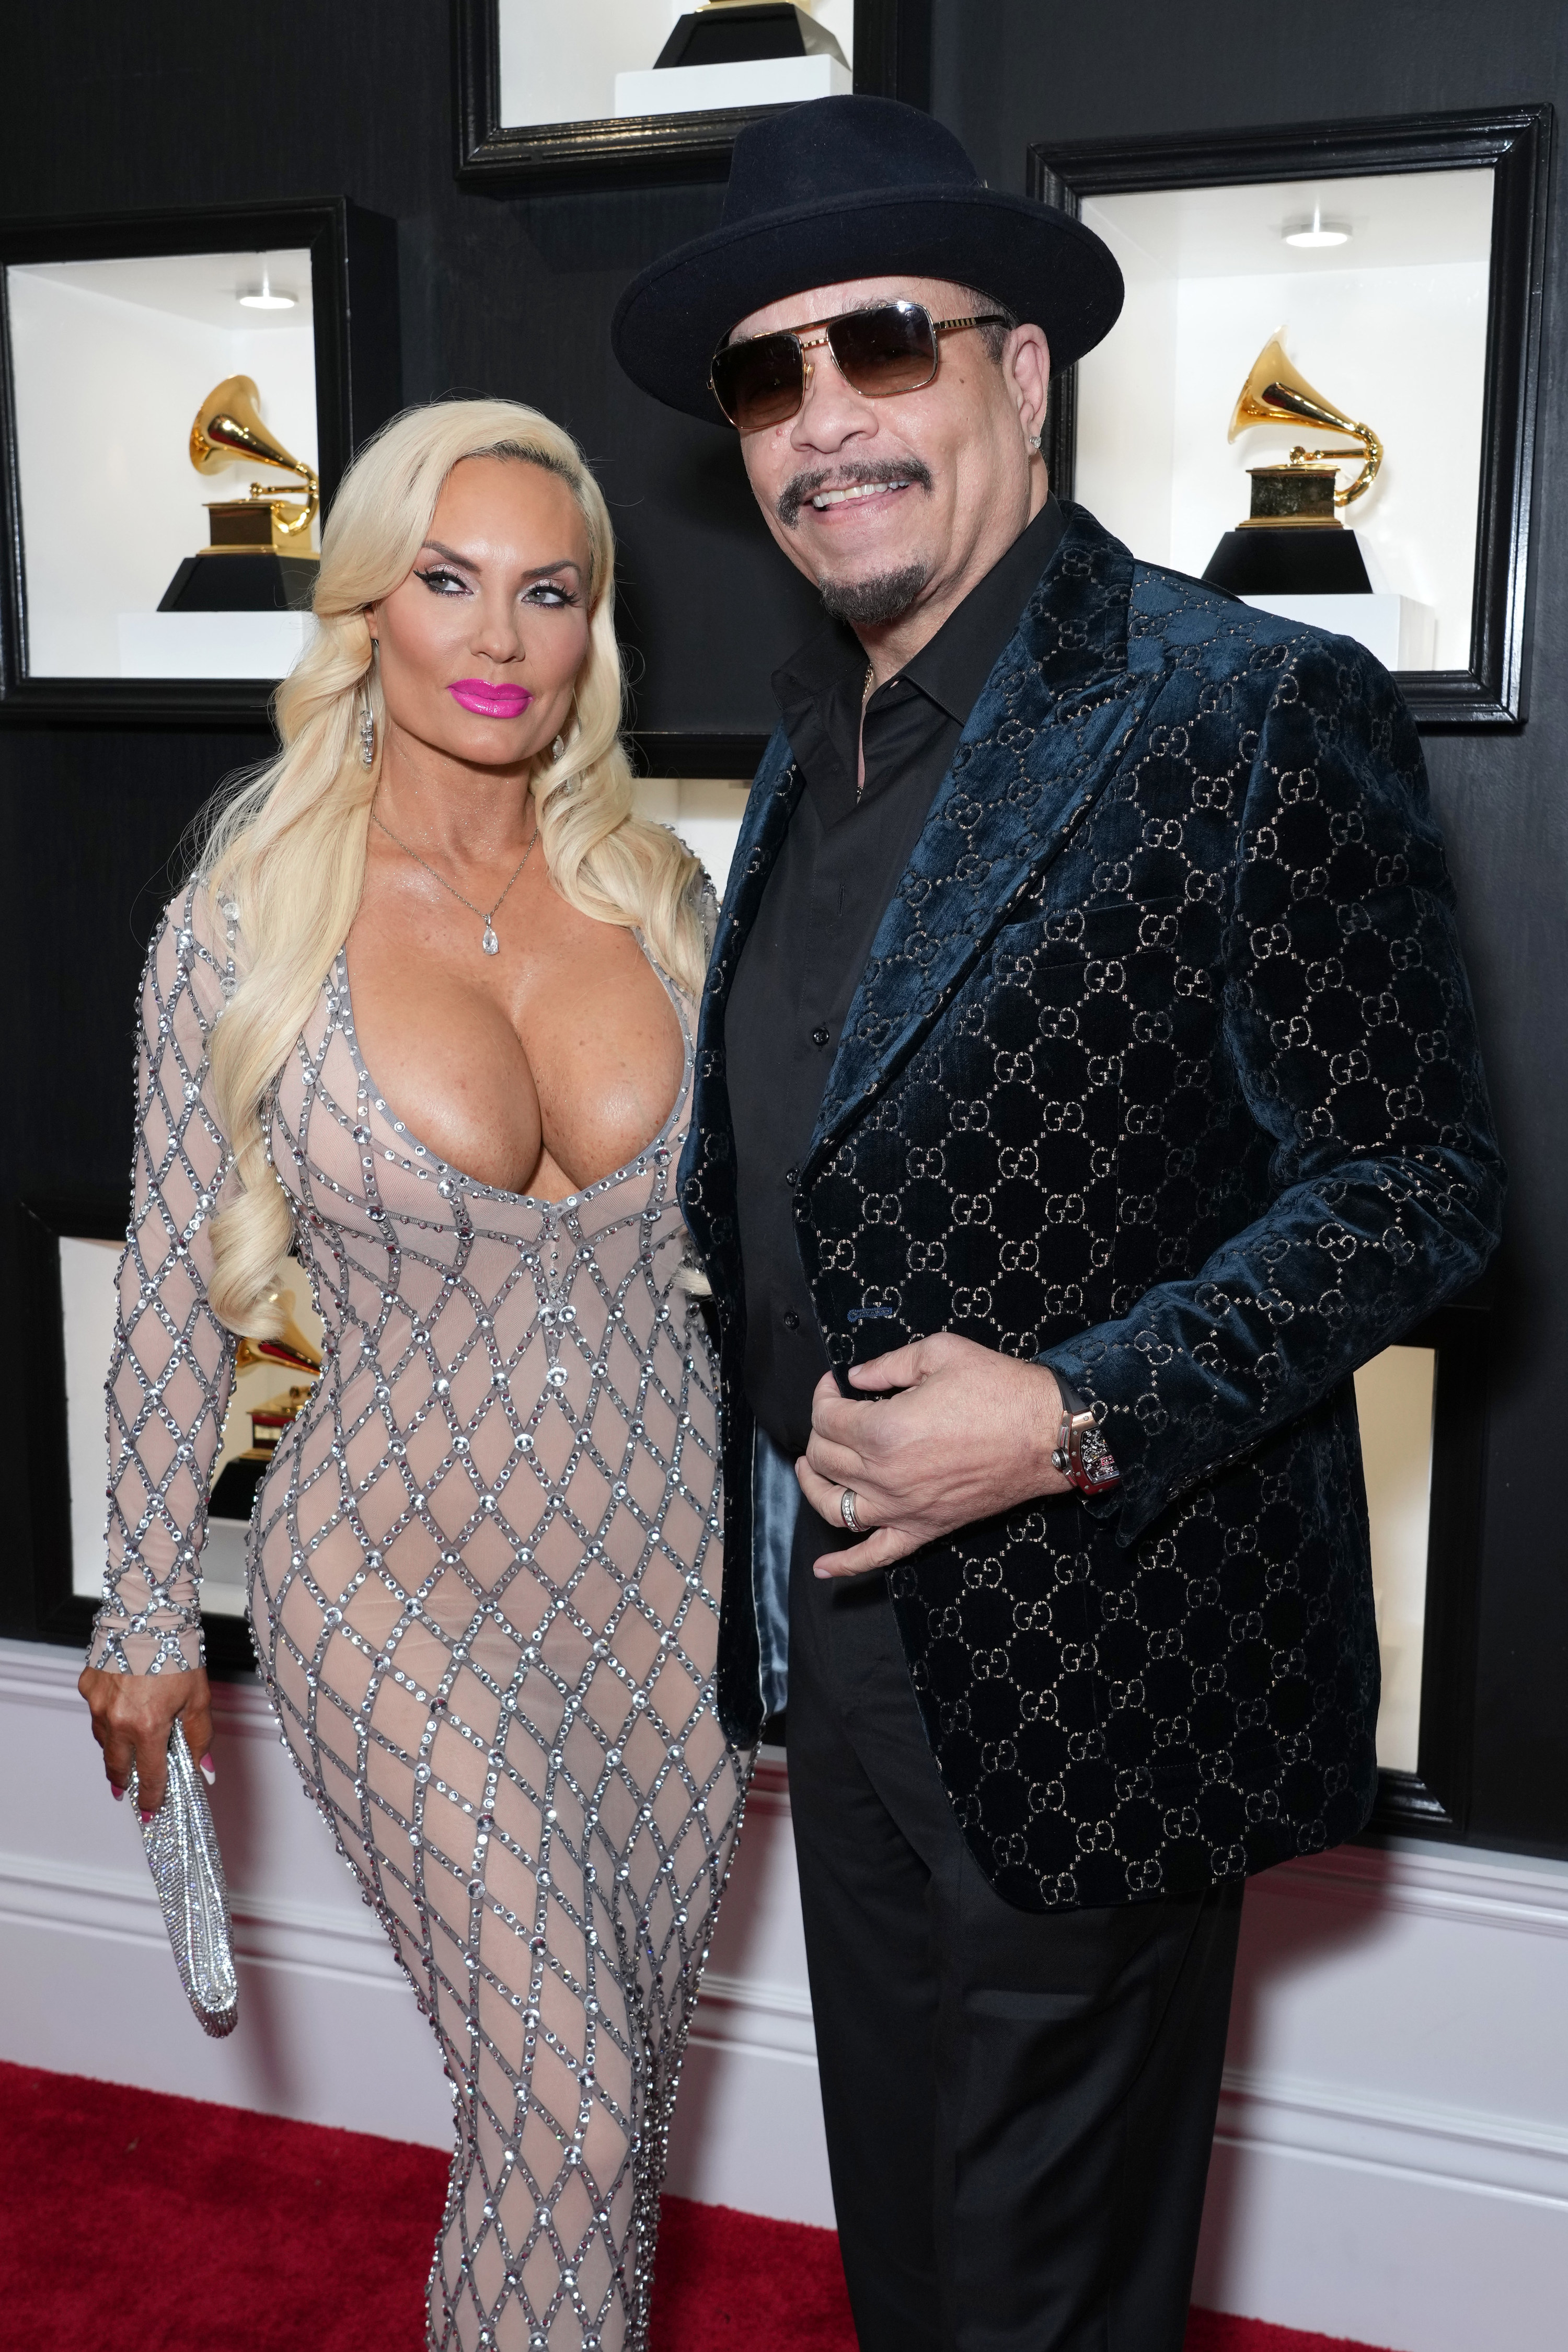 Coco and Ice-T